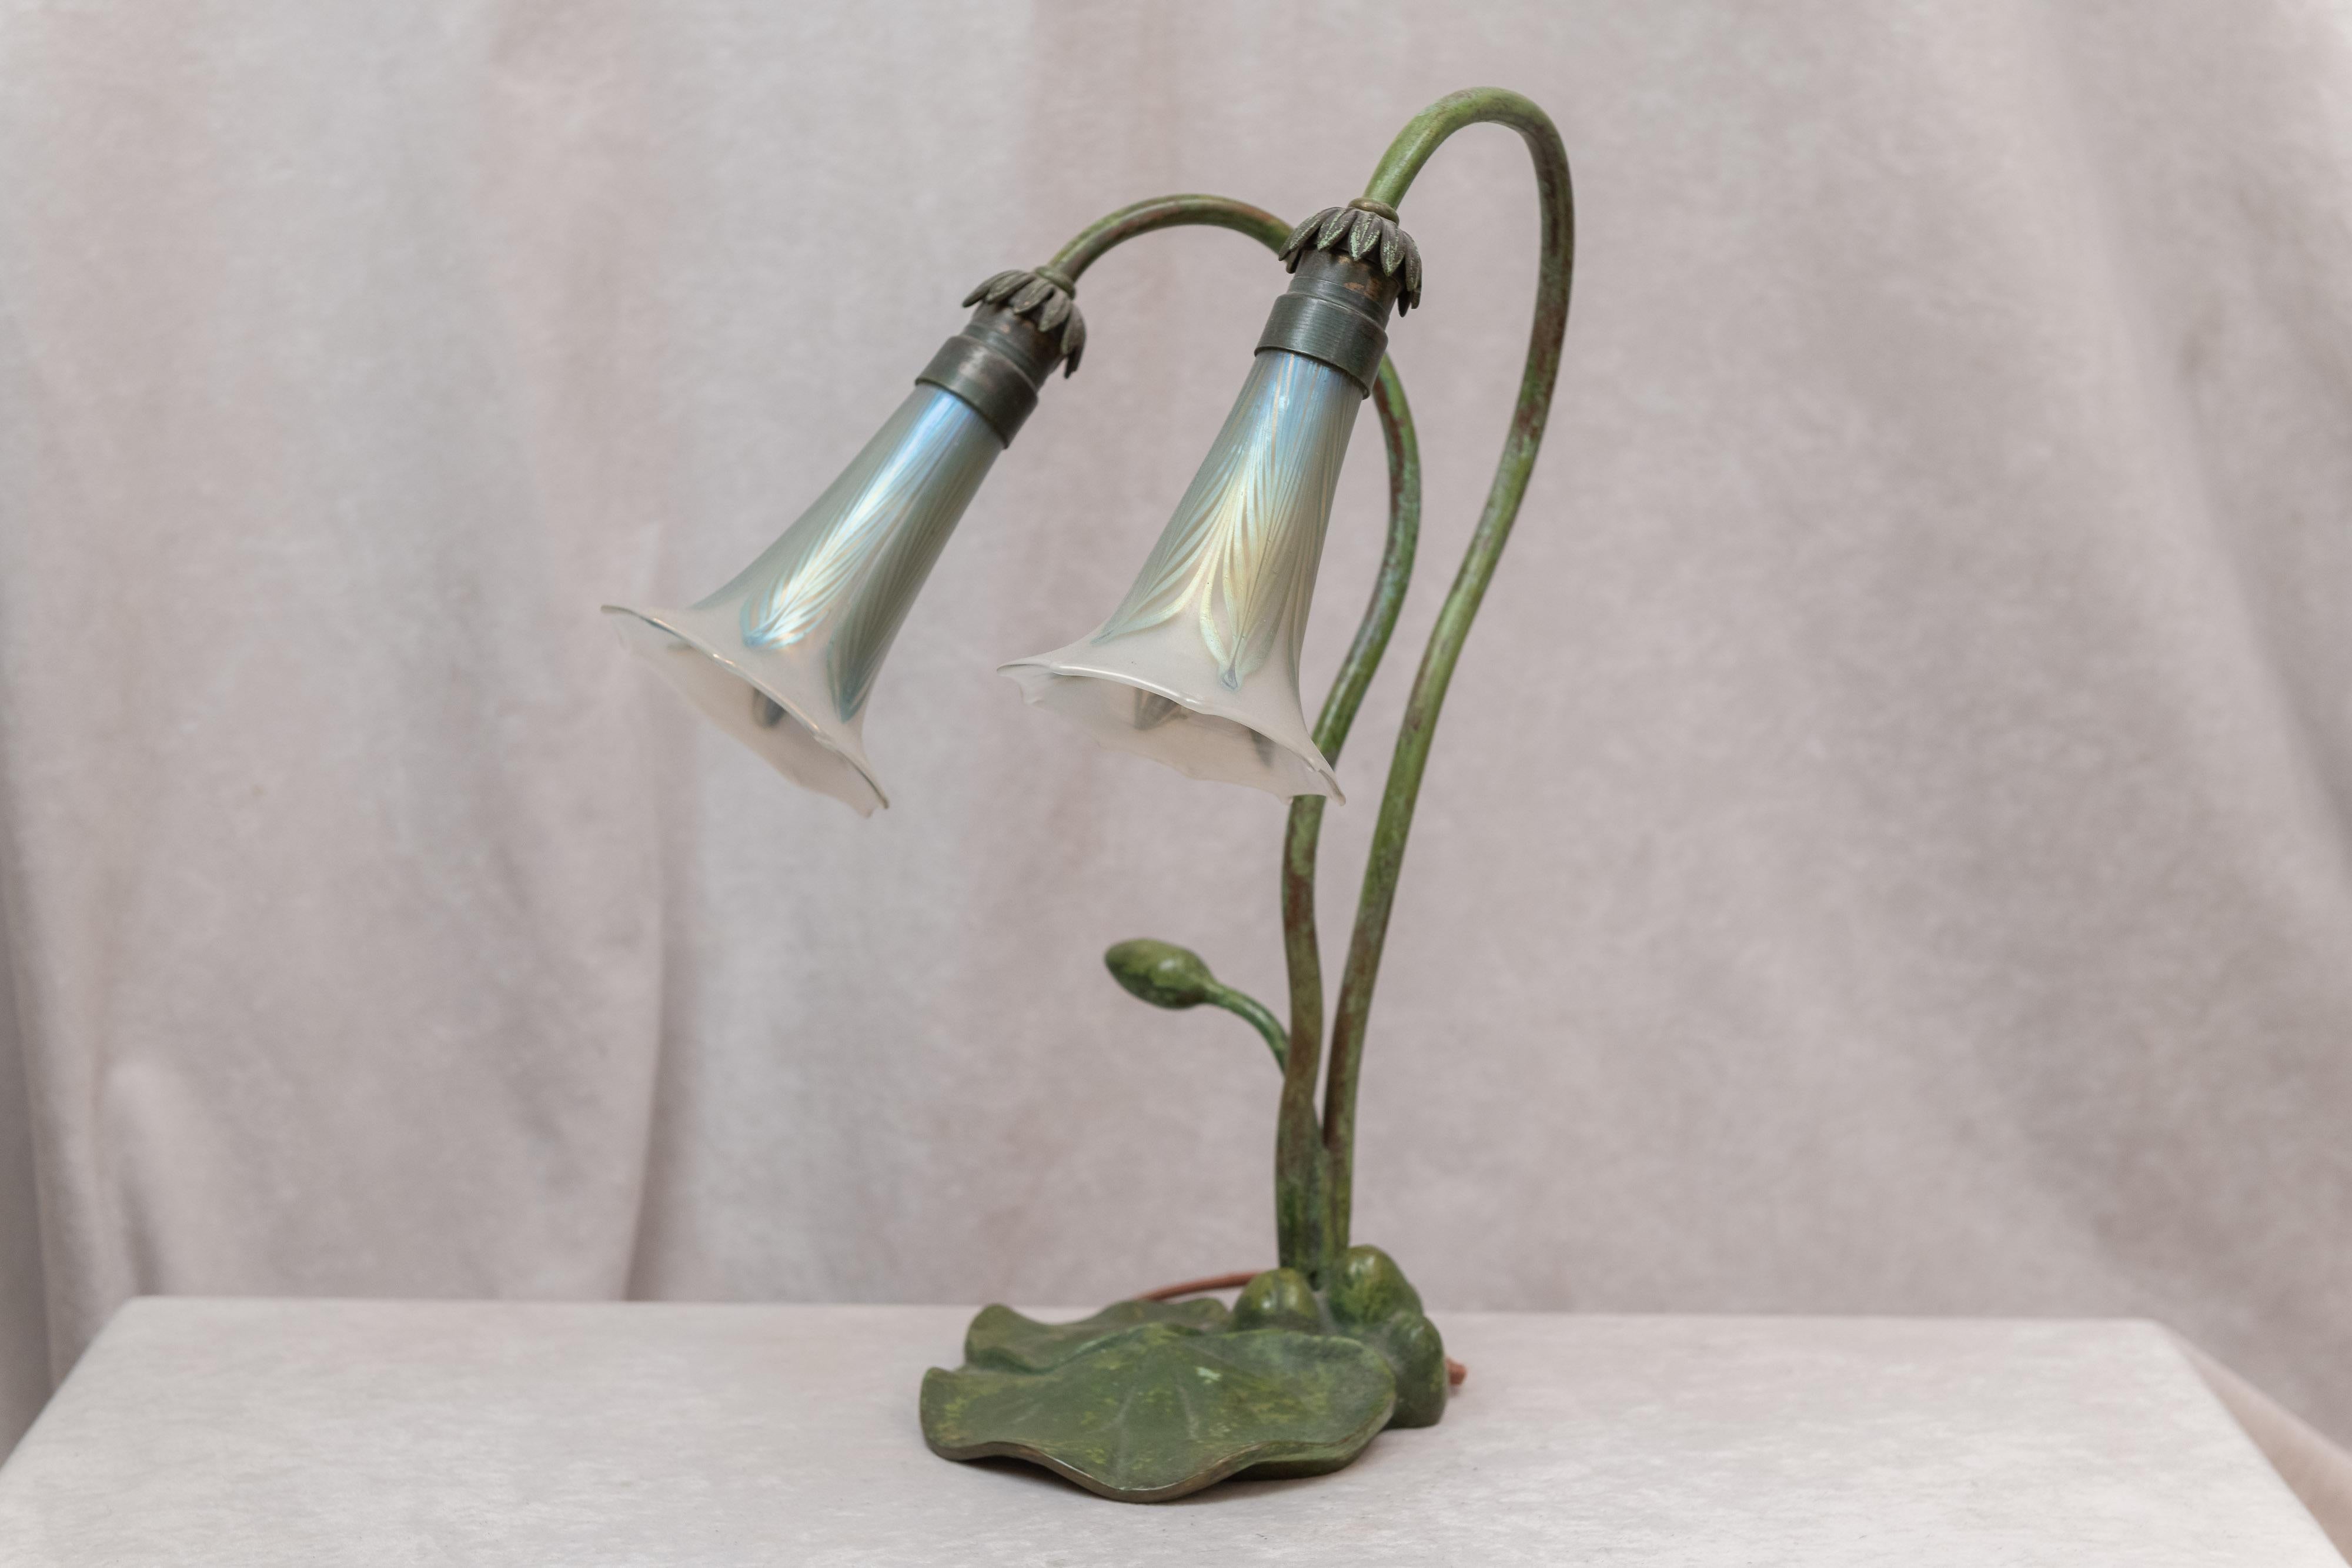 This little lamp is a wonderful addition for the art nouveau lover, or anyone else who appreciates fine work and beautiful lines. The bronze base still retains it's original green patina and the 2 glass shades are done in the pulled feather design.